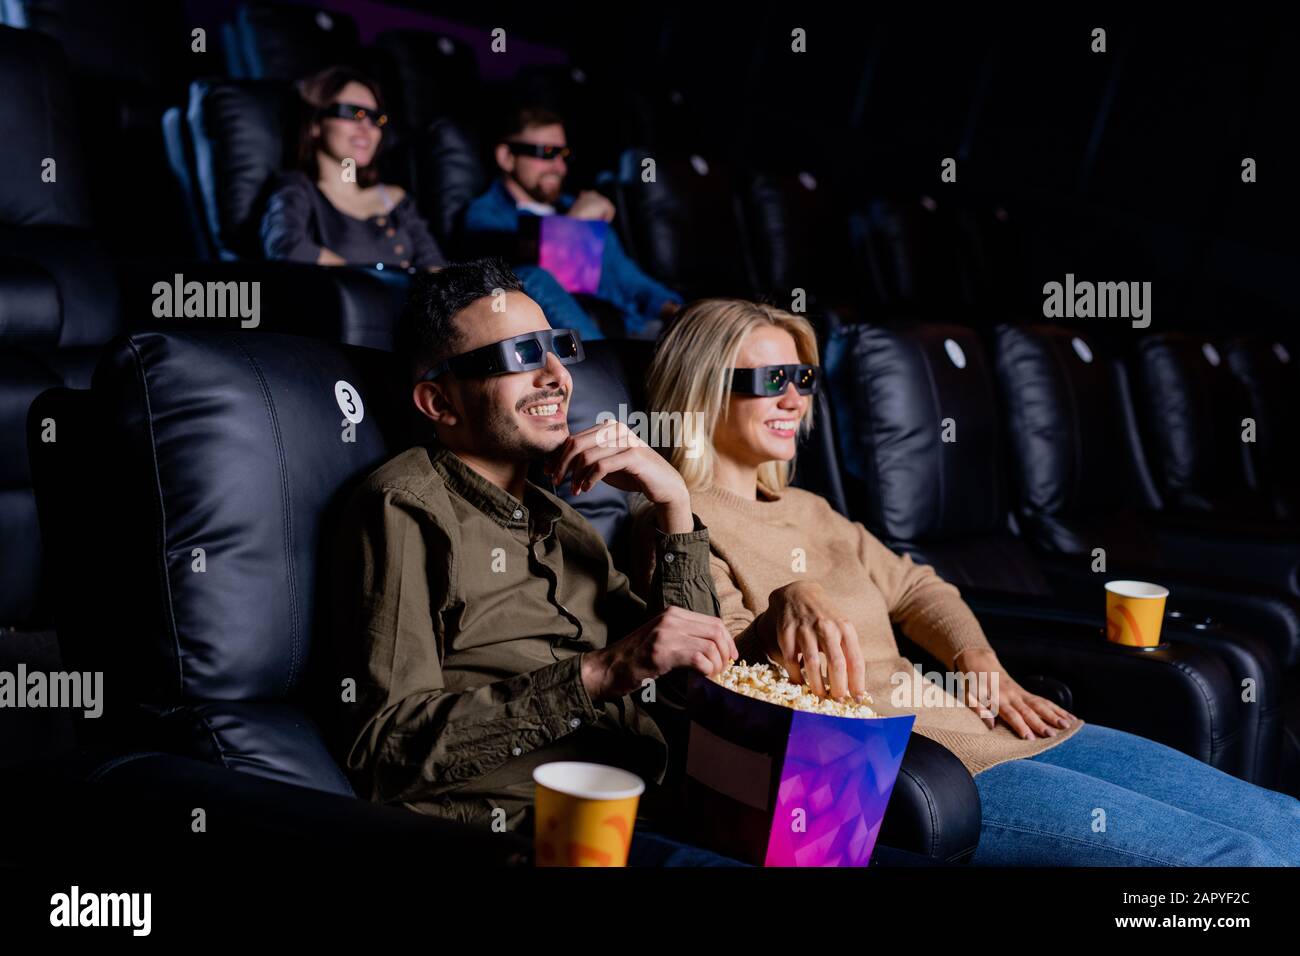 Young smiling couple in 3d eyeglasses enjoying time in front of large screen Stock Photo